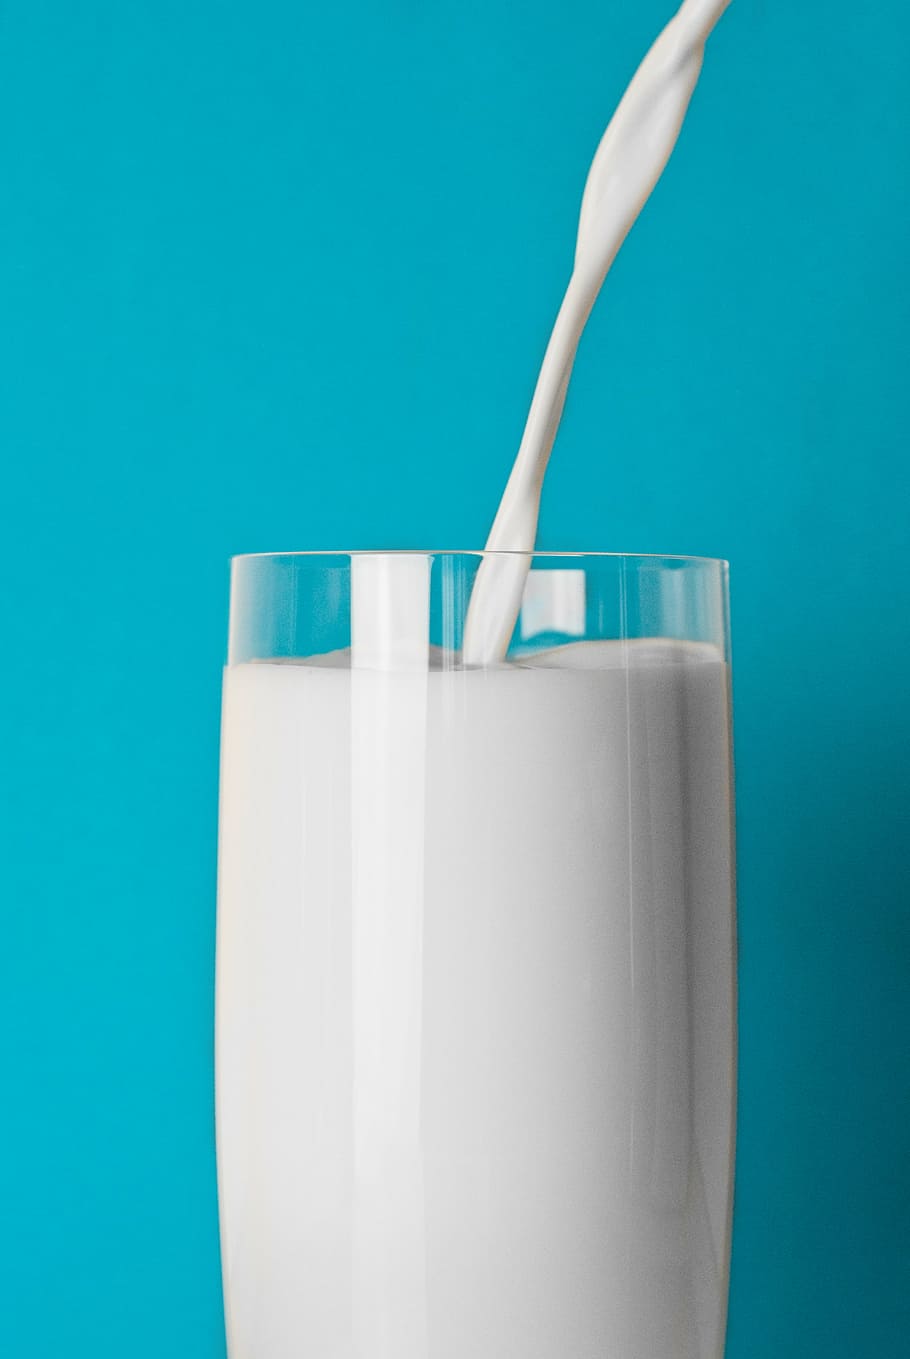 milk, pouring, white, drinking glass, cup, filled, glass, drink, colored background, studio shot